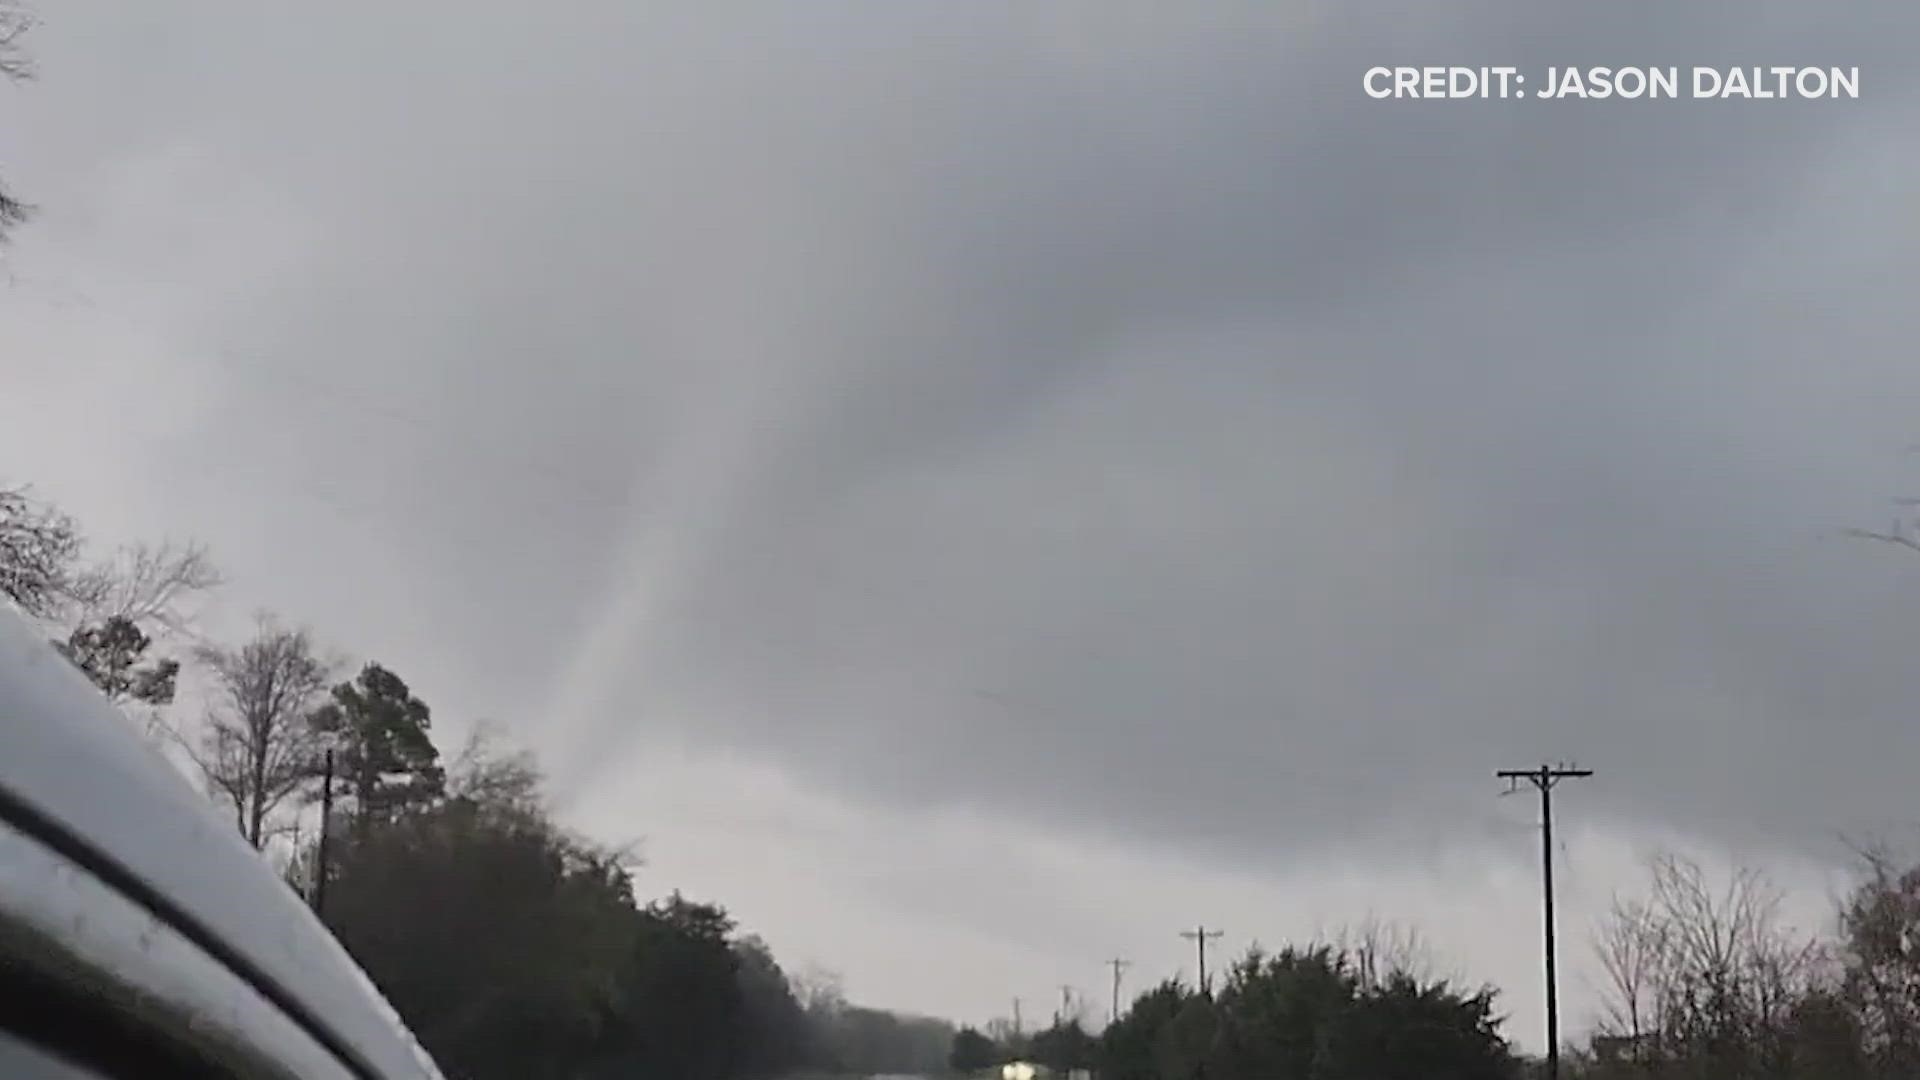 A possible tornado in Texas was caught on camera near Pickton in Hopkins County.